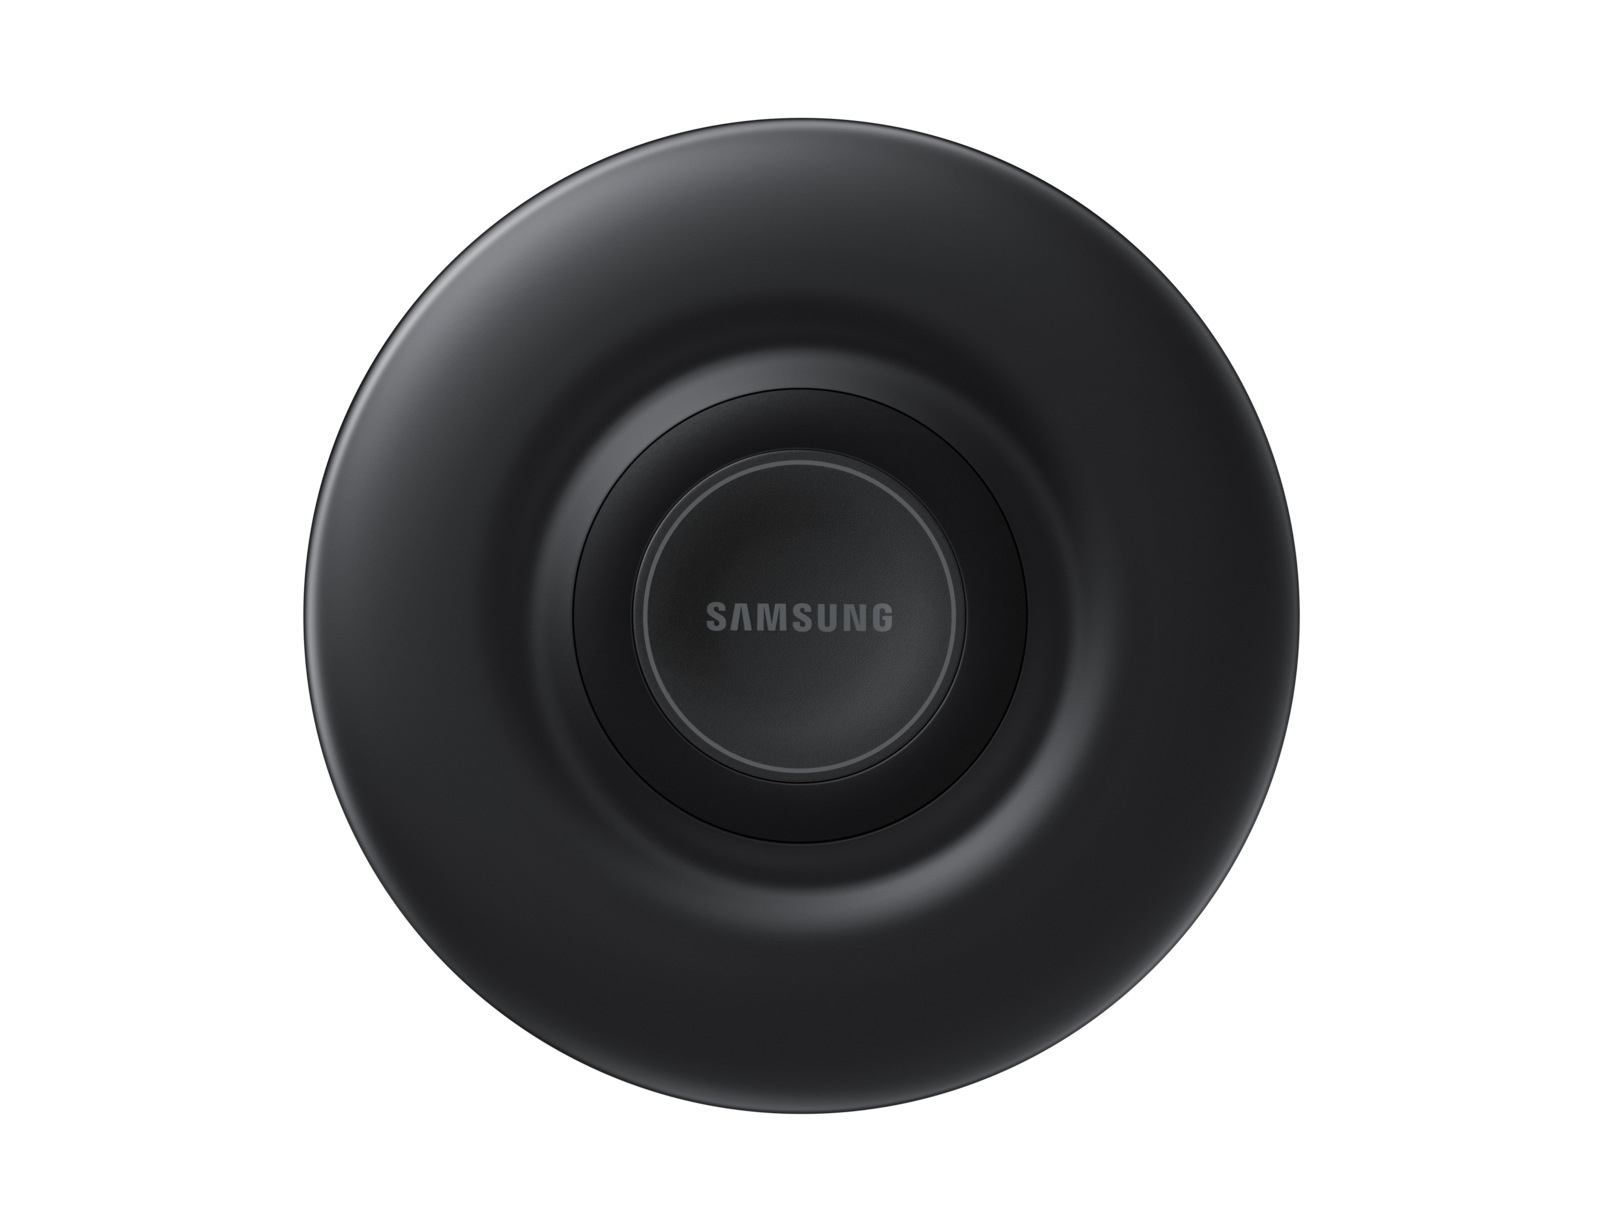 Samsung Wireless Charger Pad Black for Galaxy S9+/S9/Note8